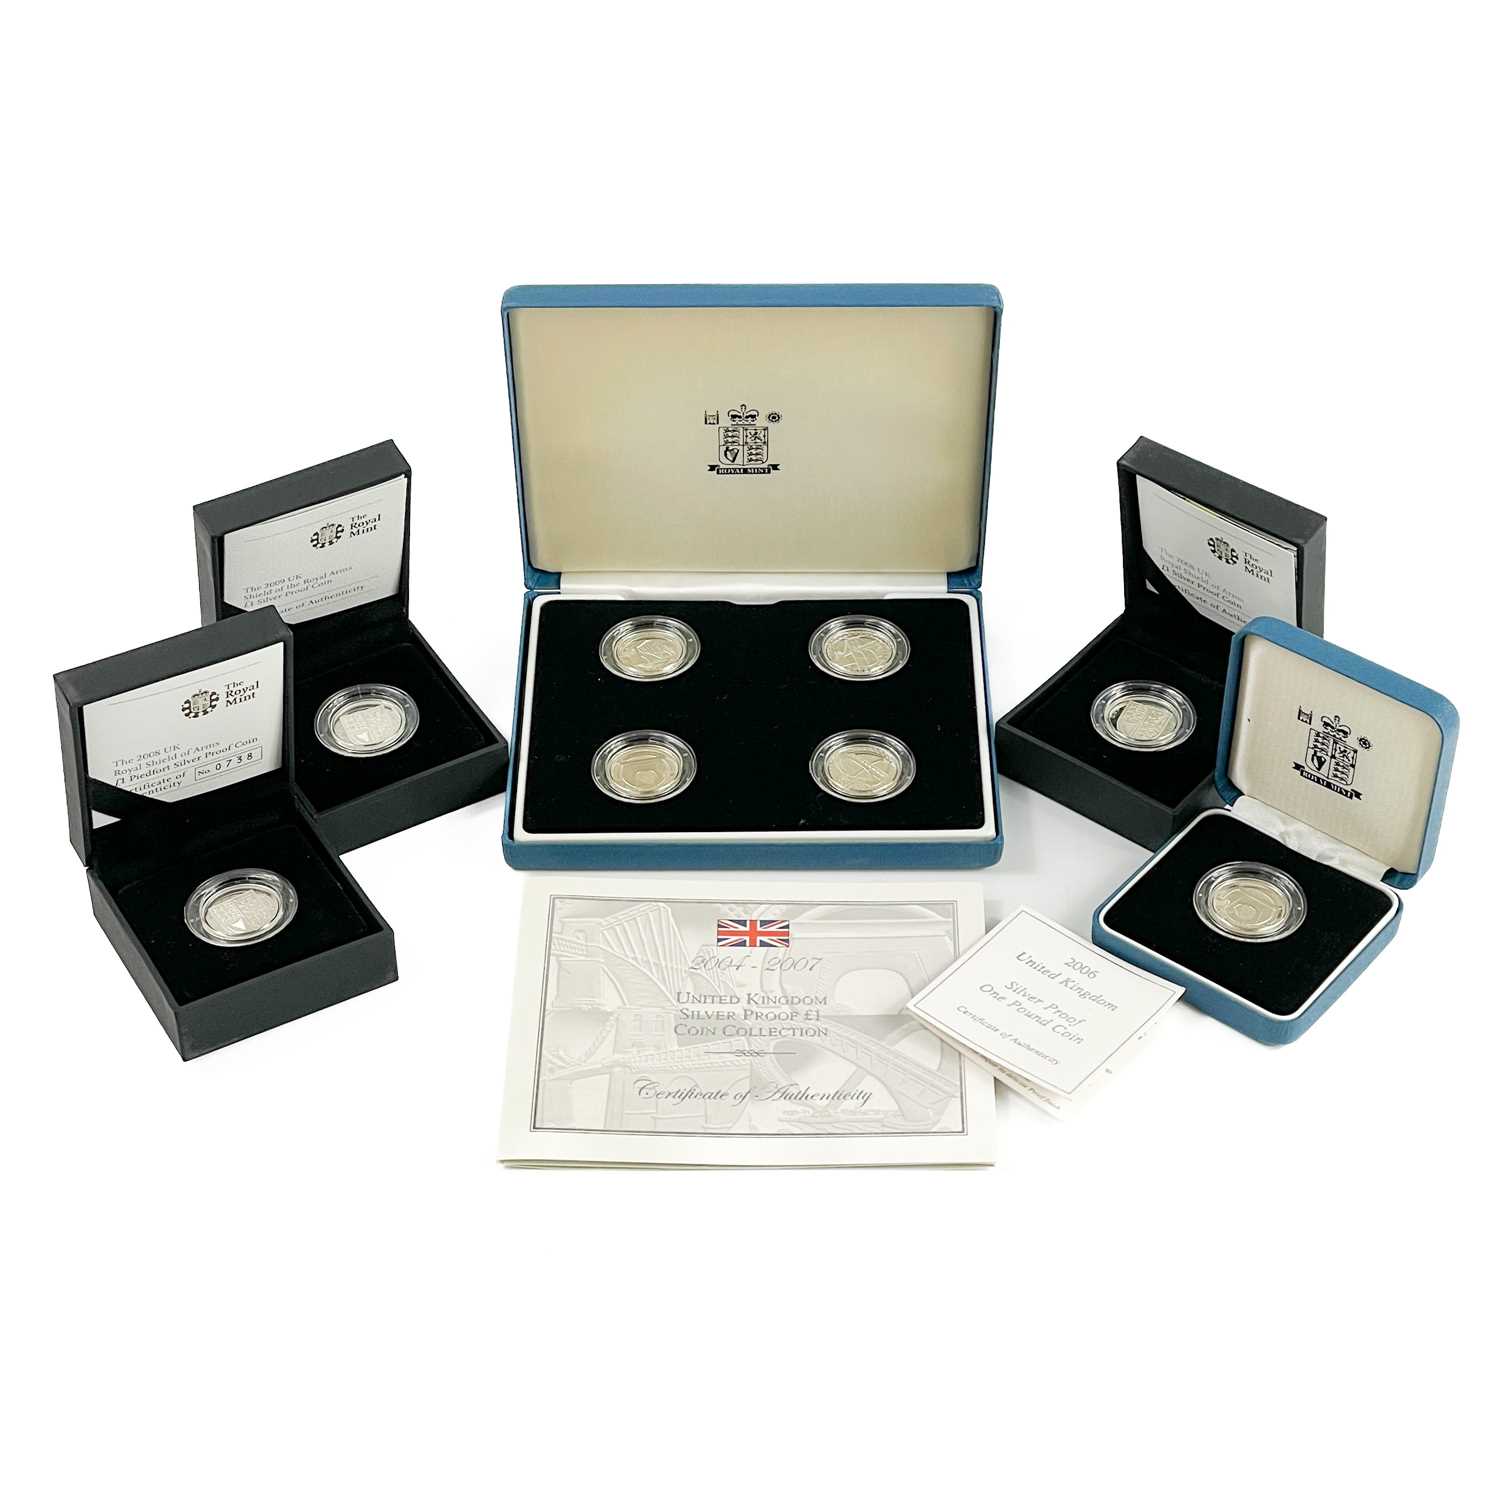 UK Silver Proof £1 Coins 2006 to 2009 (8 coins) in Royal Mint Coin Cases.